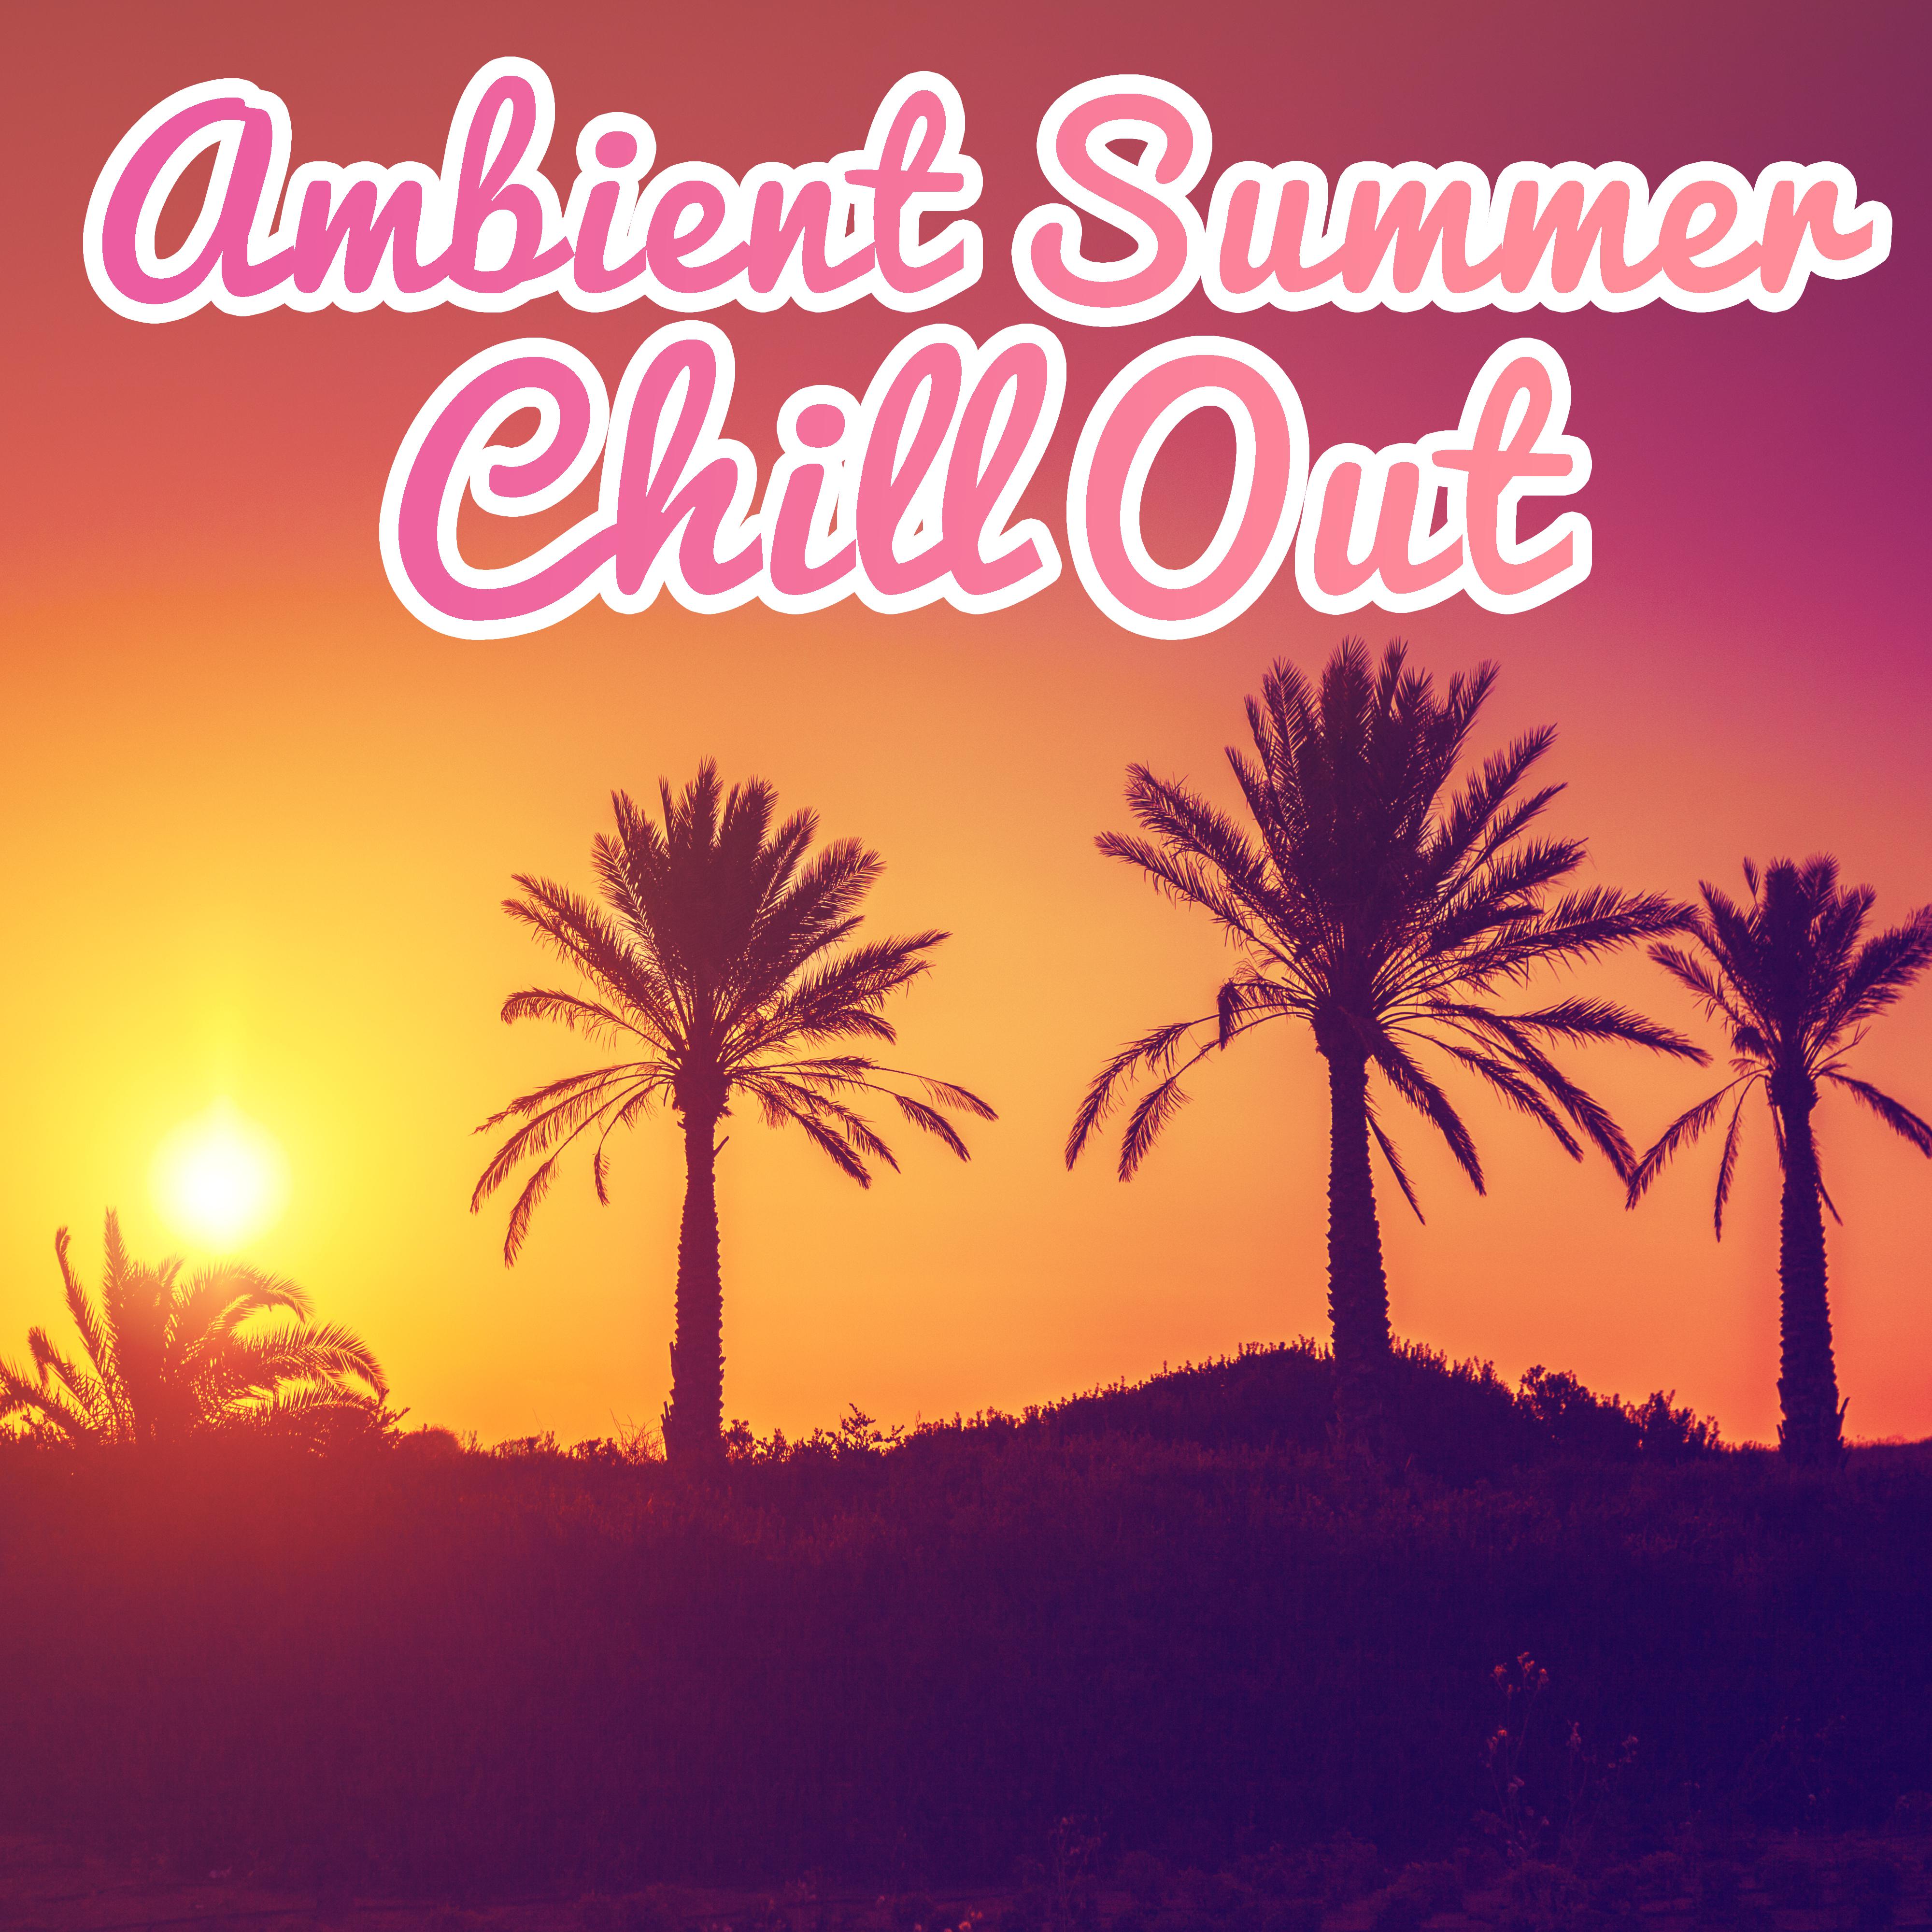 Ambient Summer Chill Out  Relax  Chill, Electronic Beats, Chill Out Vibes, Summer Music